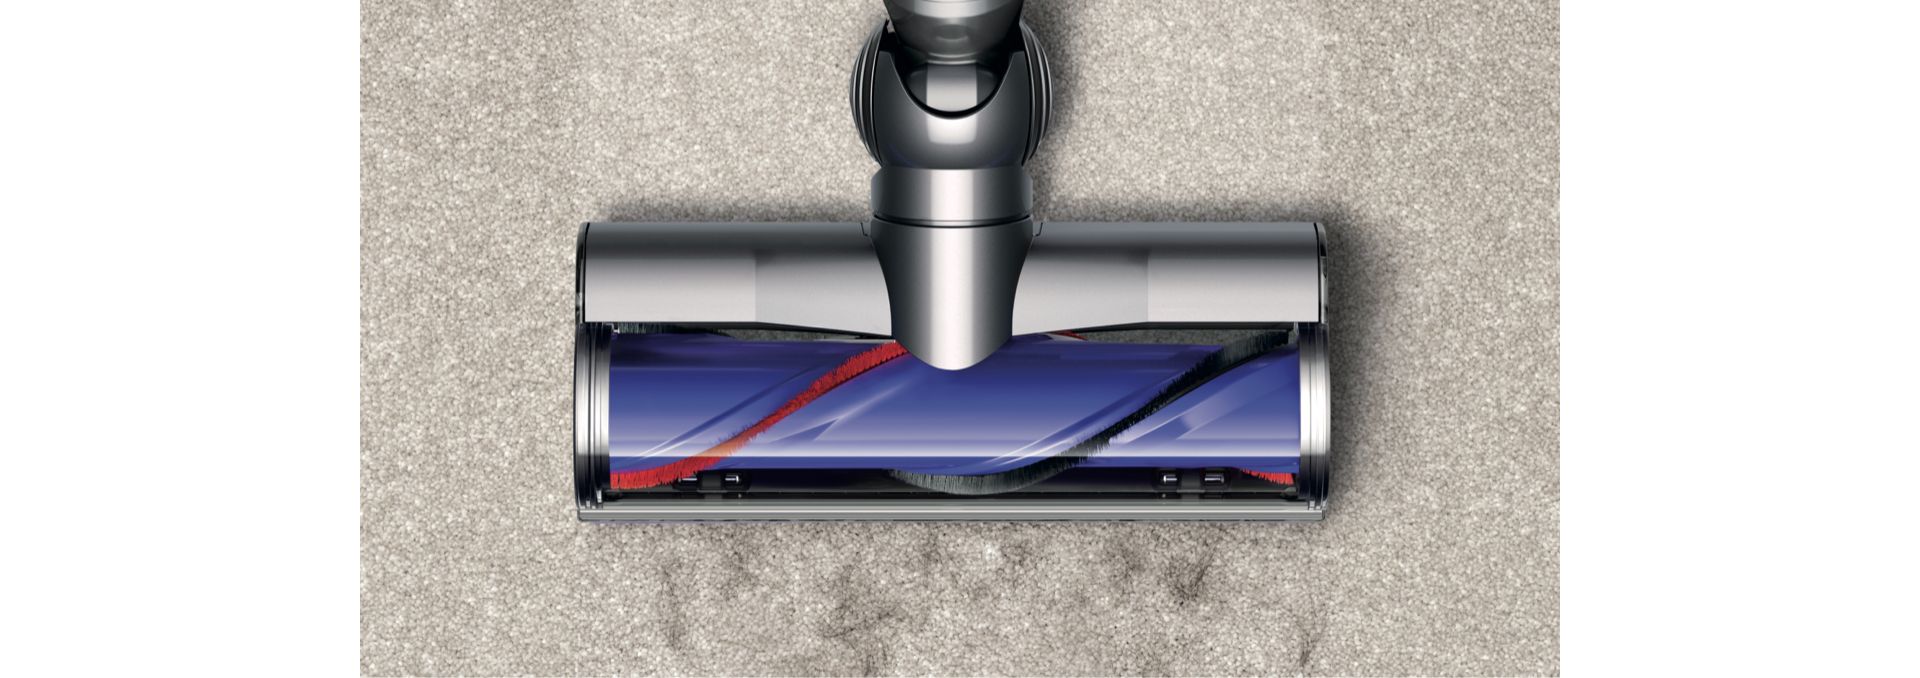 Support and troubleshooting for your Dyson V12 Detect Slim™ cordless vacuum  